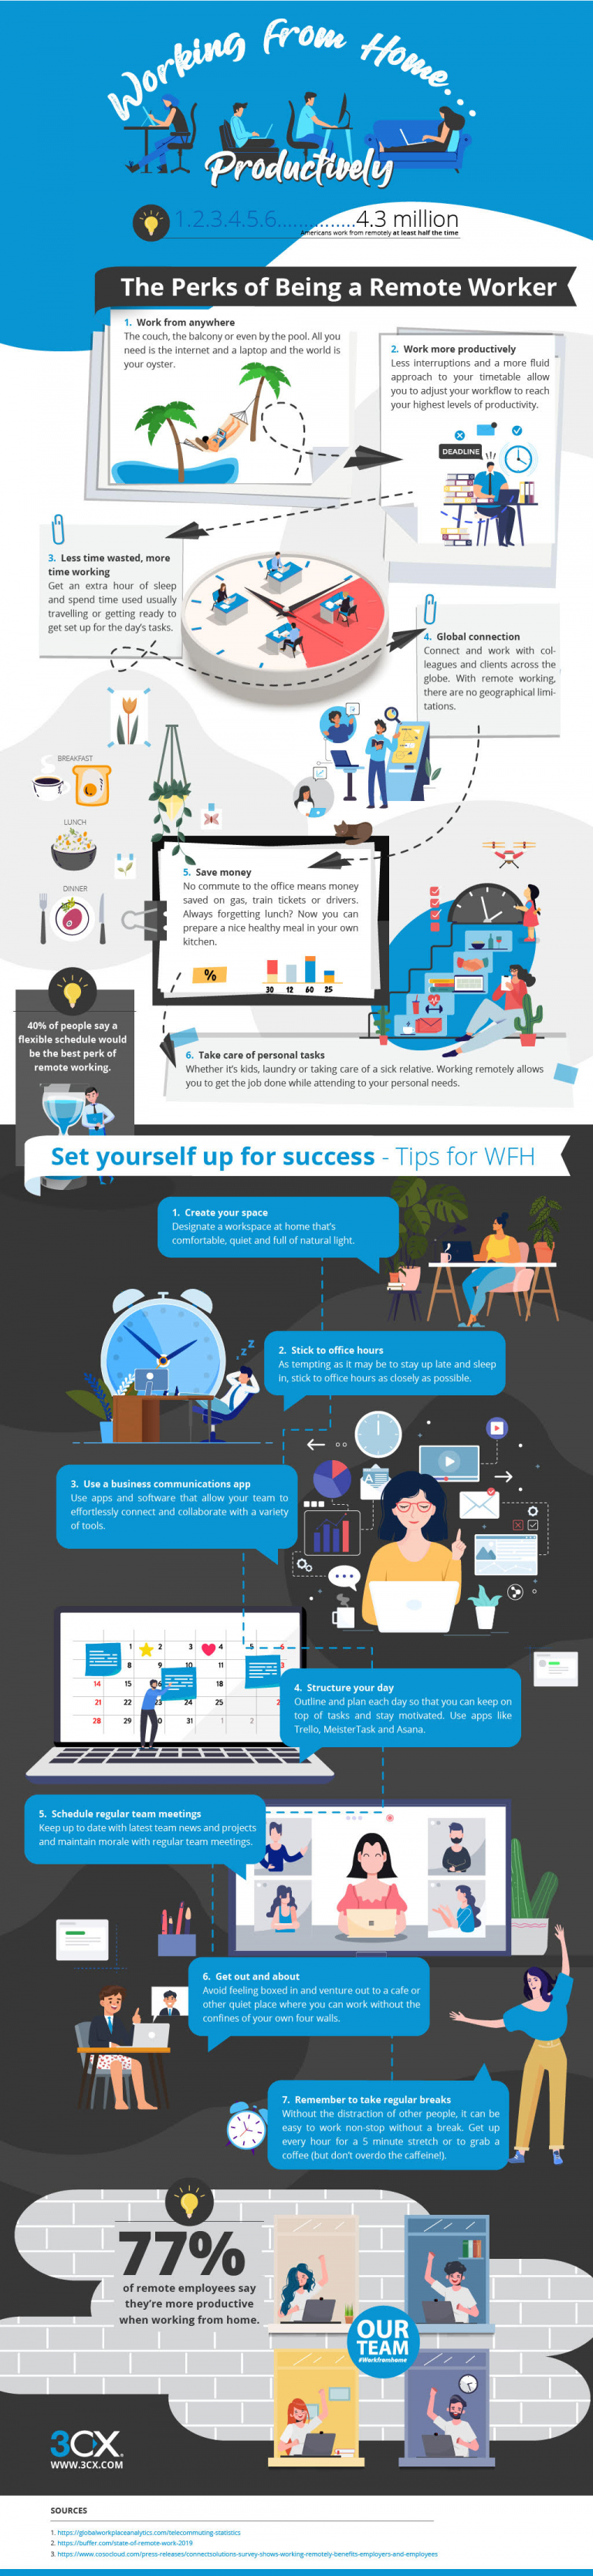 Tips for Working Remotely…and Productively #infographic